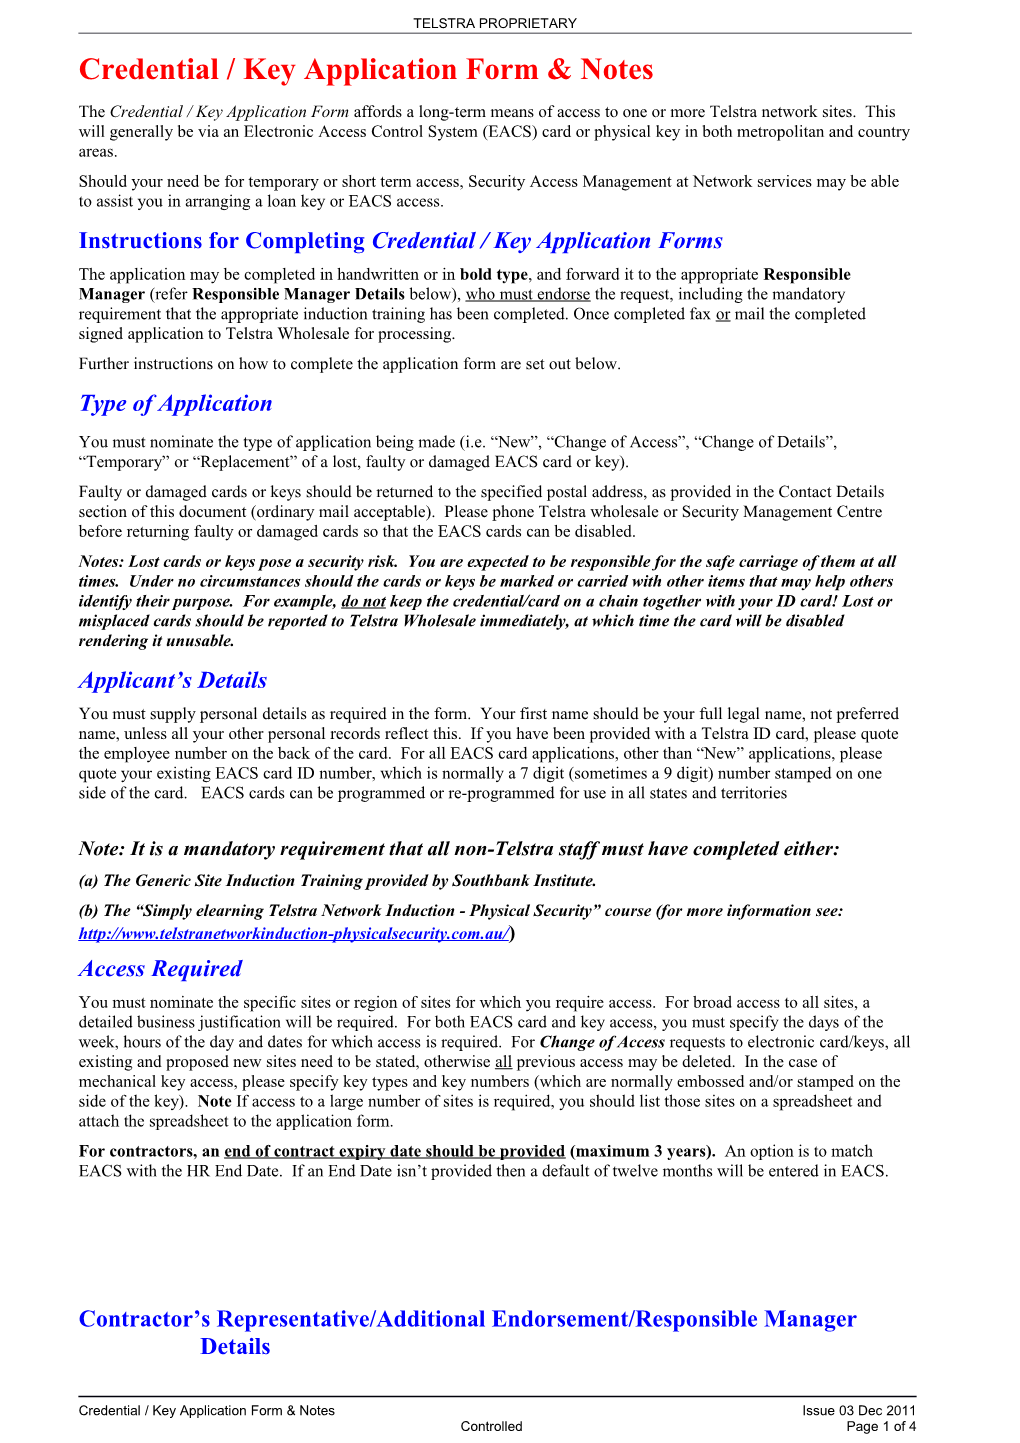 Credential / Key Application Form & Notes